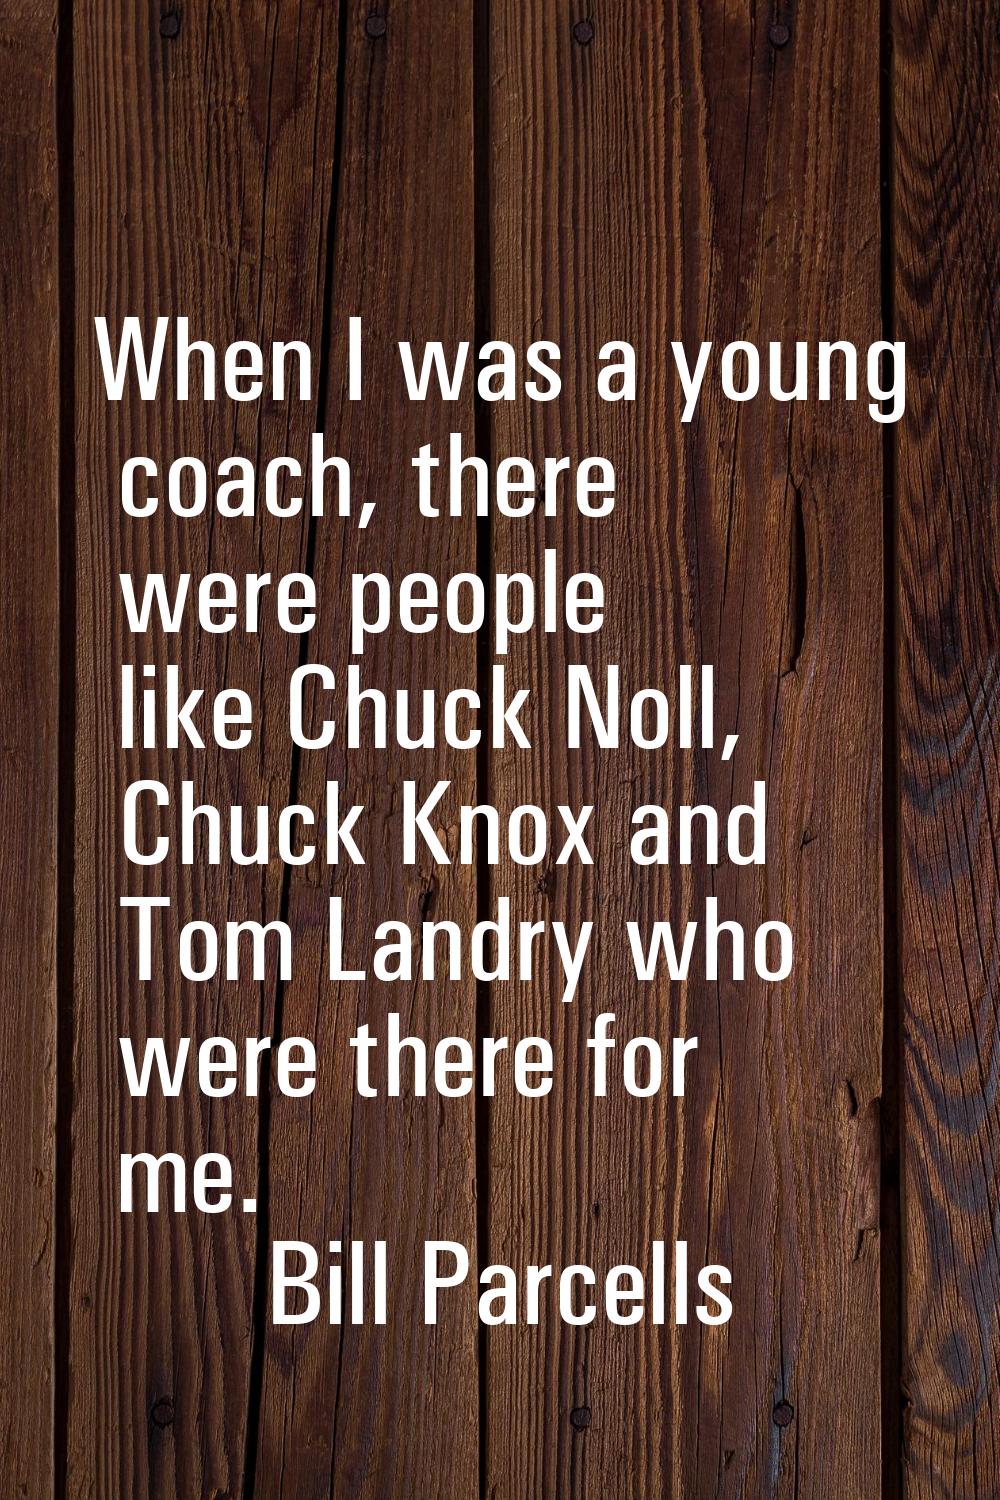 When I was a young coach, there were people like Chuck Noll, Chuck Knox and Tom Landry who were the